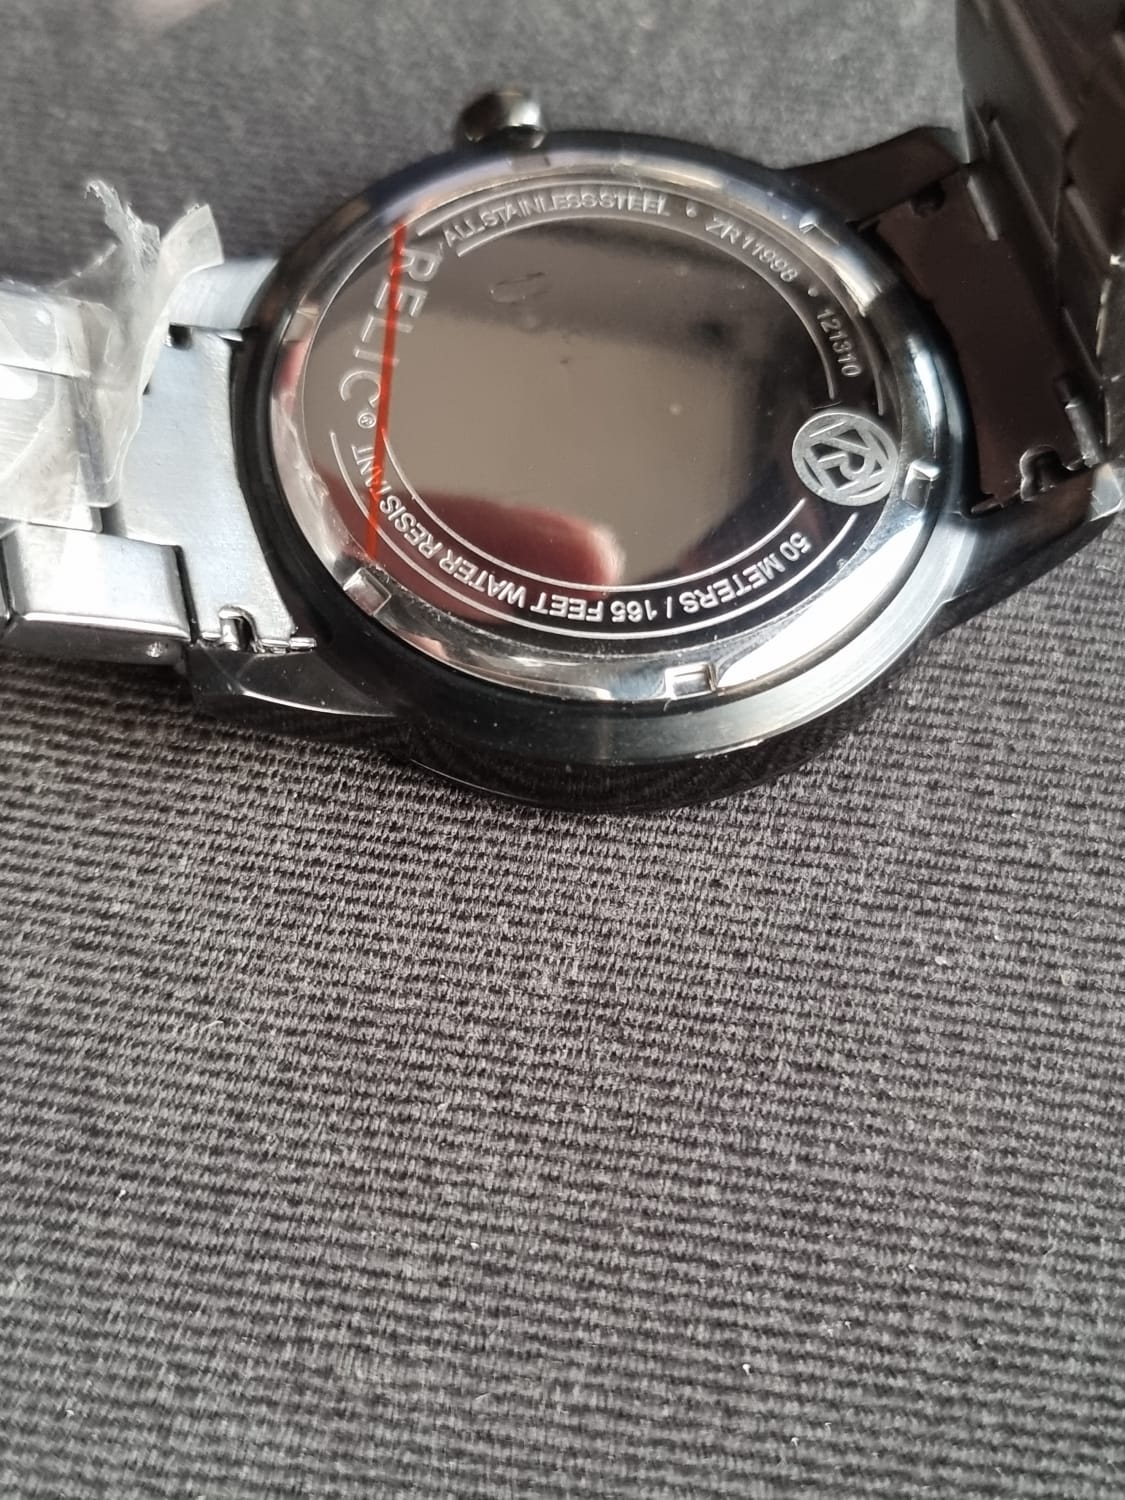 Relic Sub Brand Of Fossil Gents Watch 44mm Watch